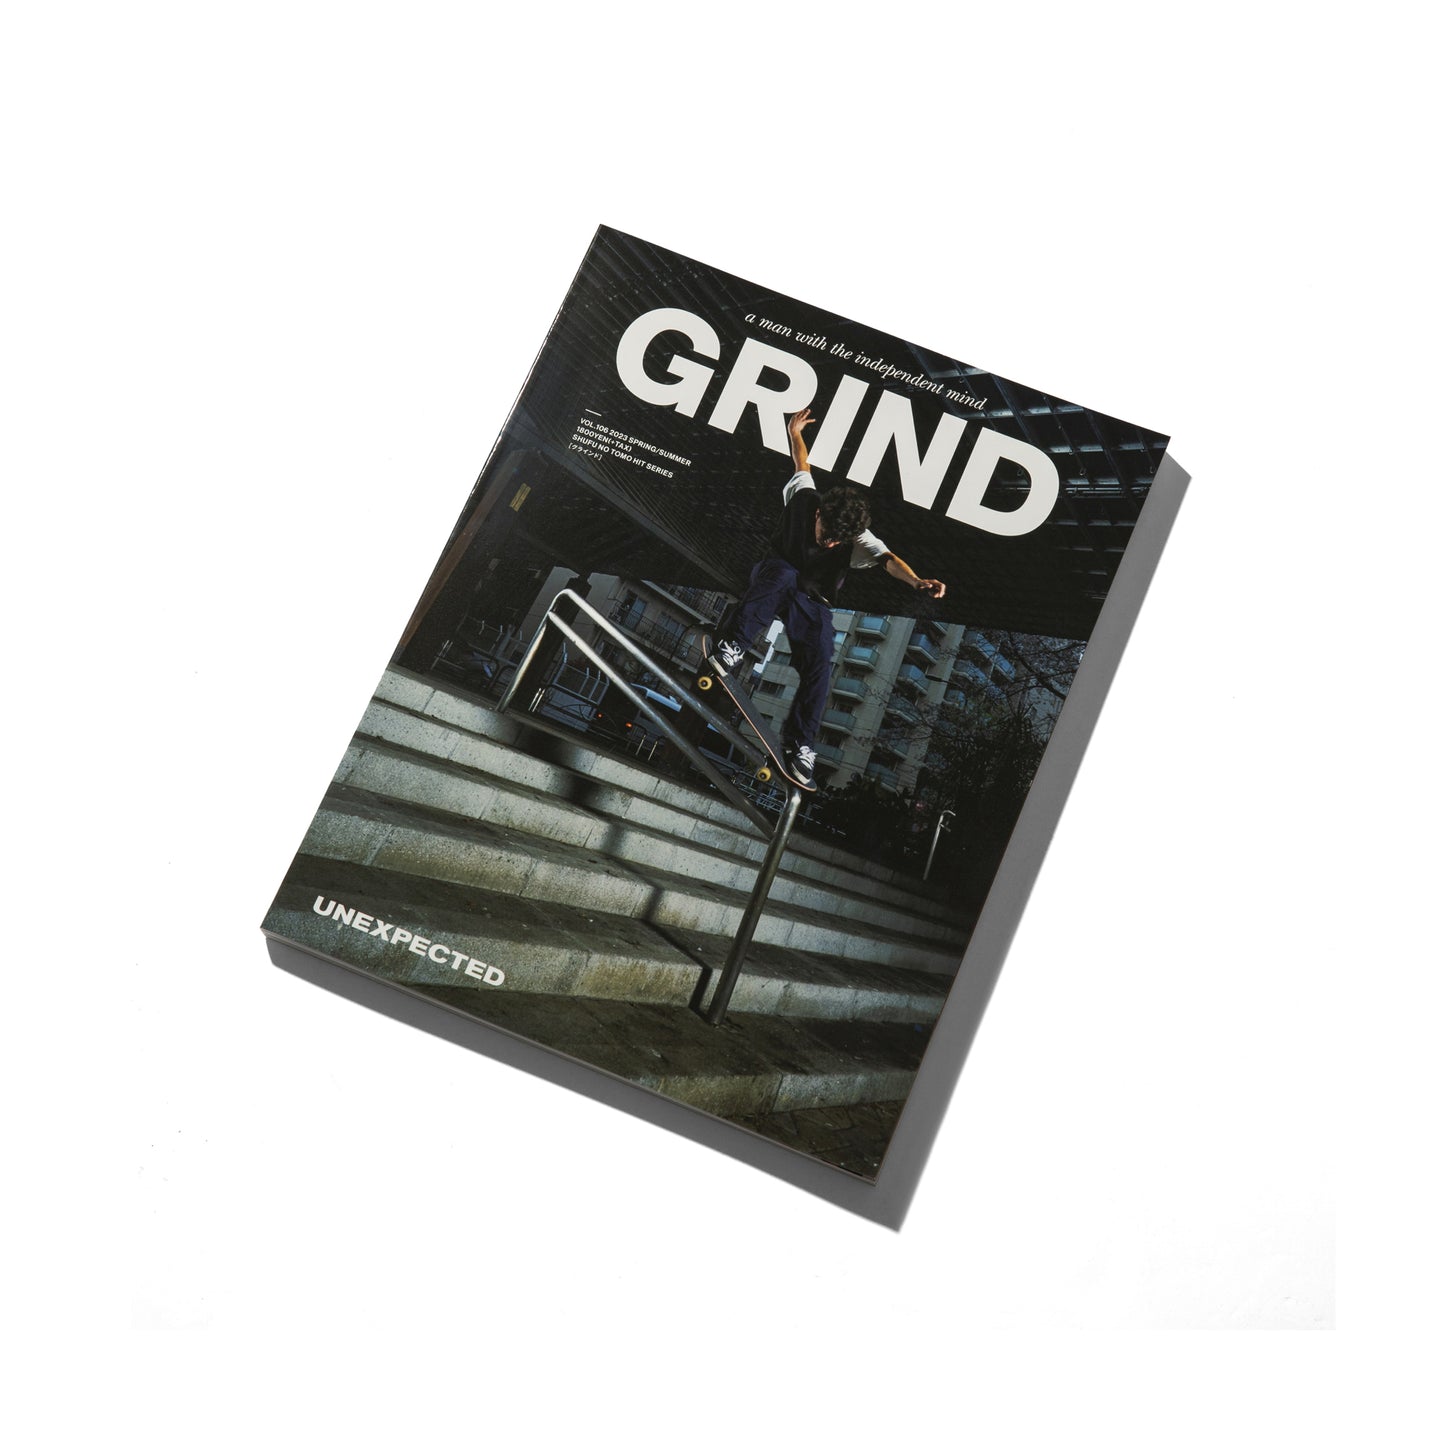 GRIND Vol.106 "UNEXPECTED"